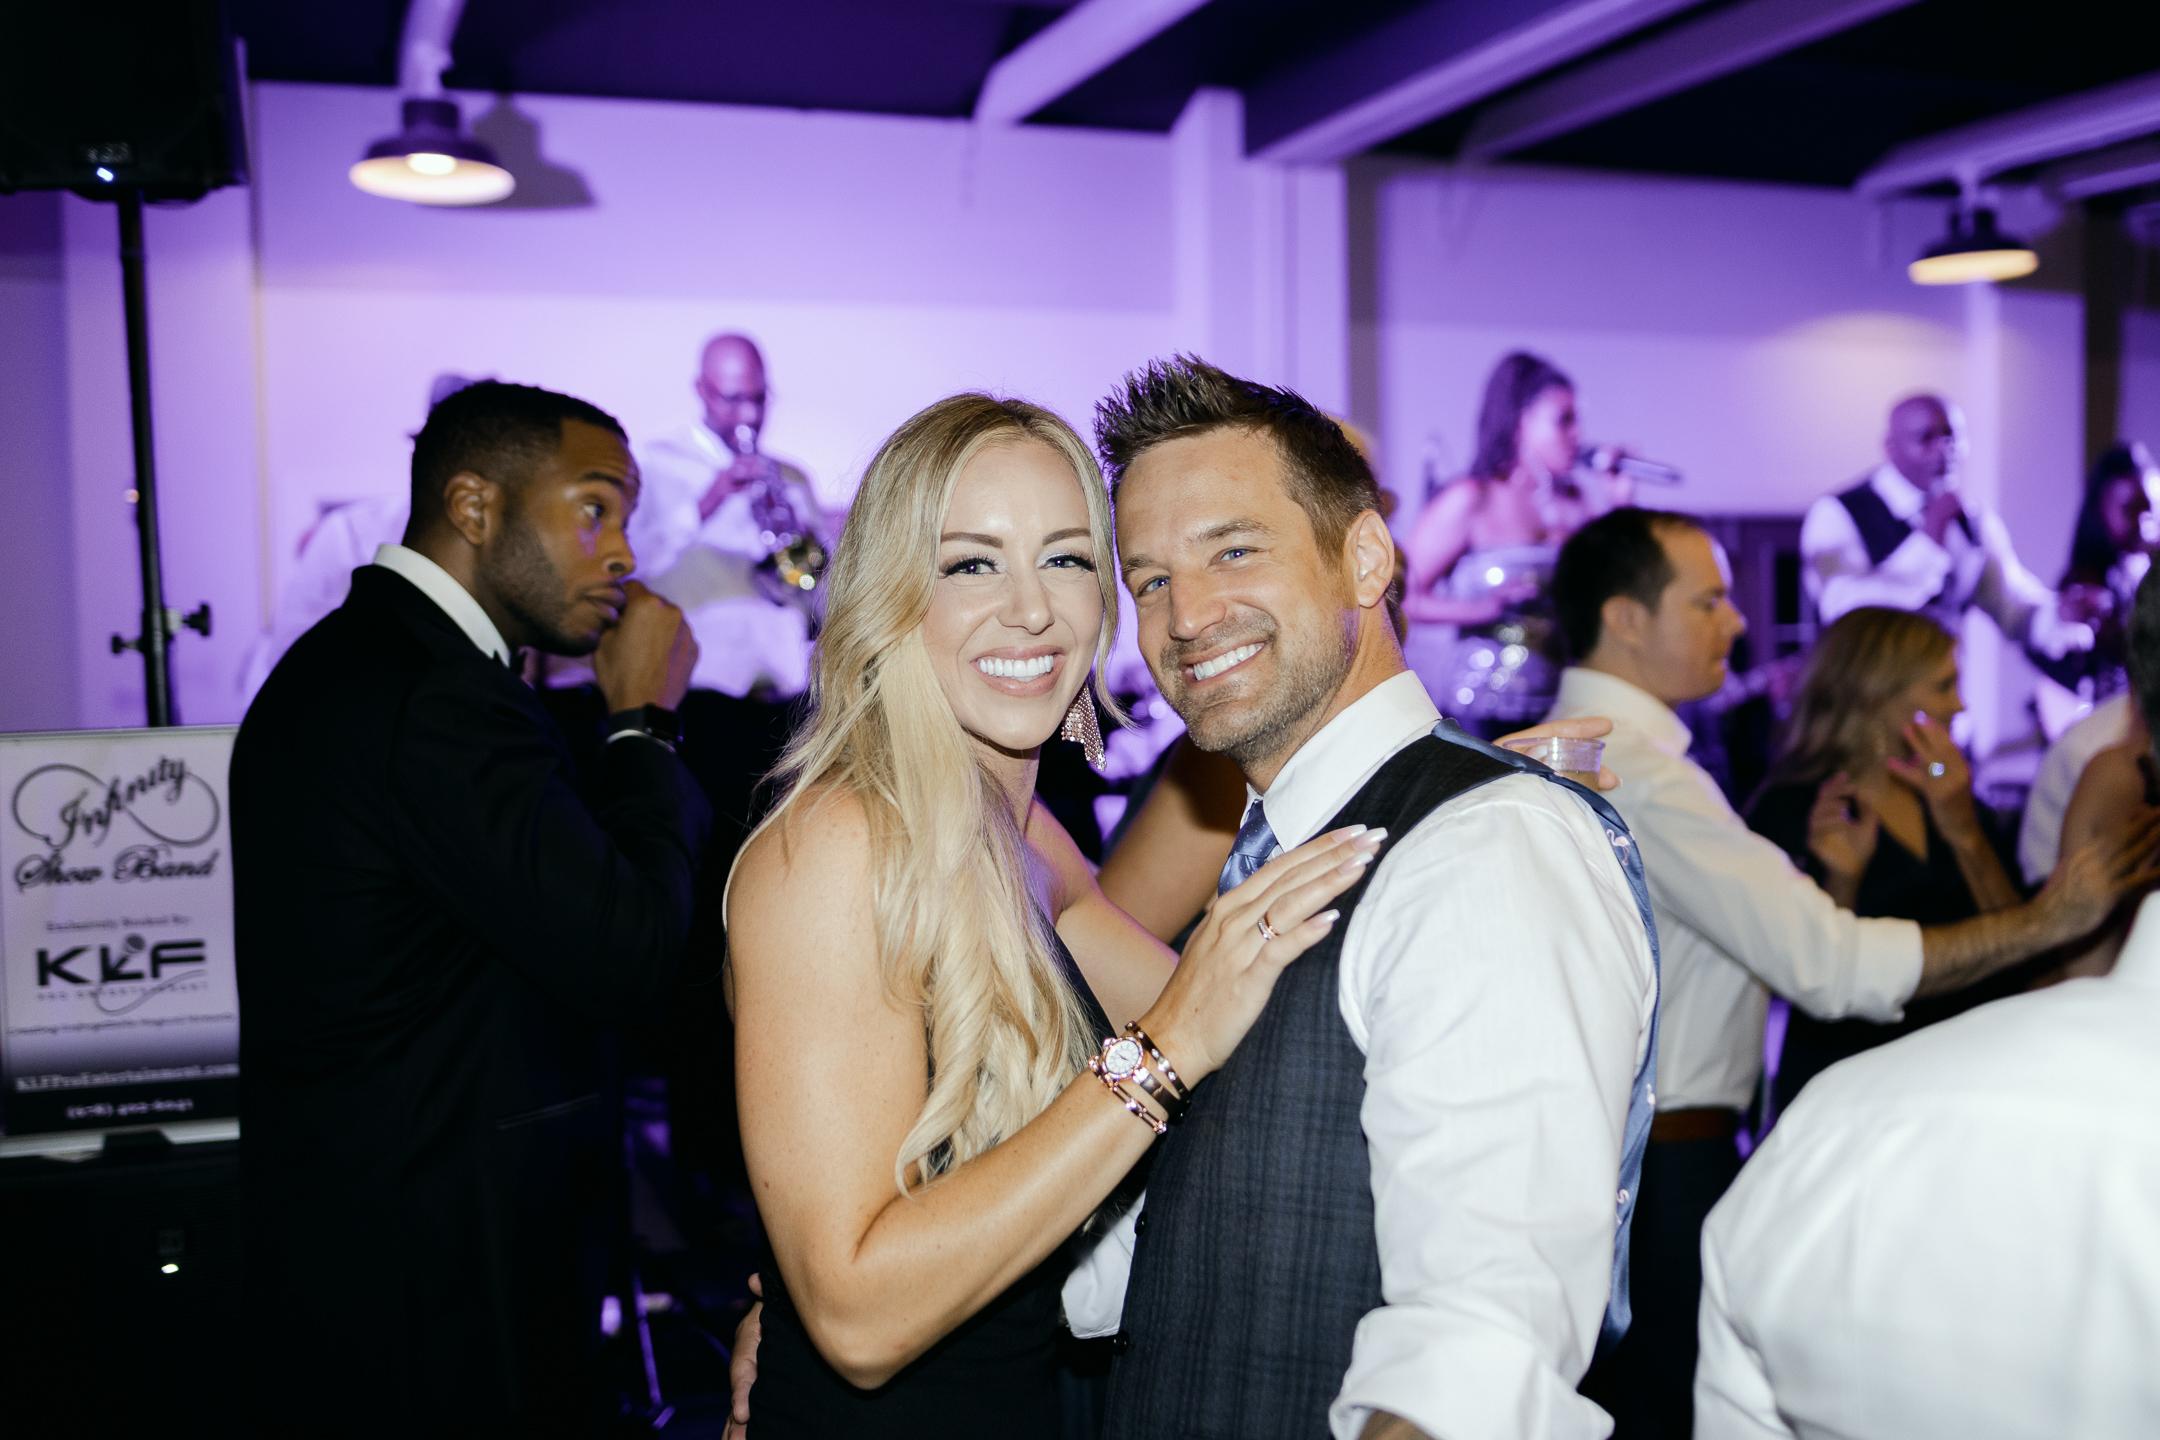 The Wedding Website of Brittany Olsson and Christopher Piniarski